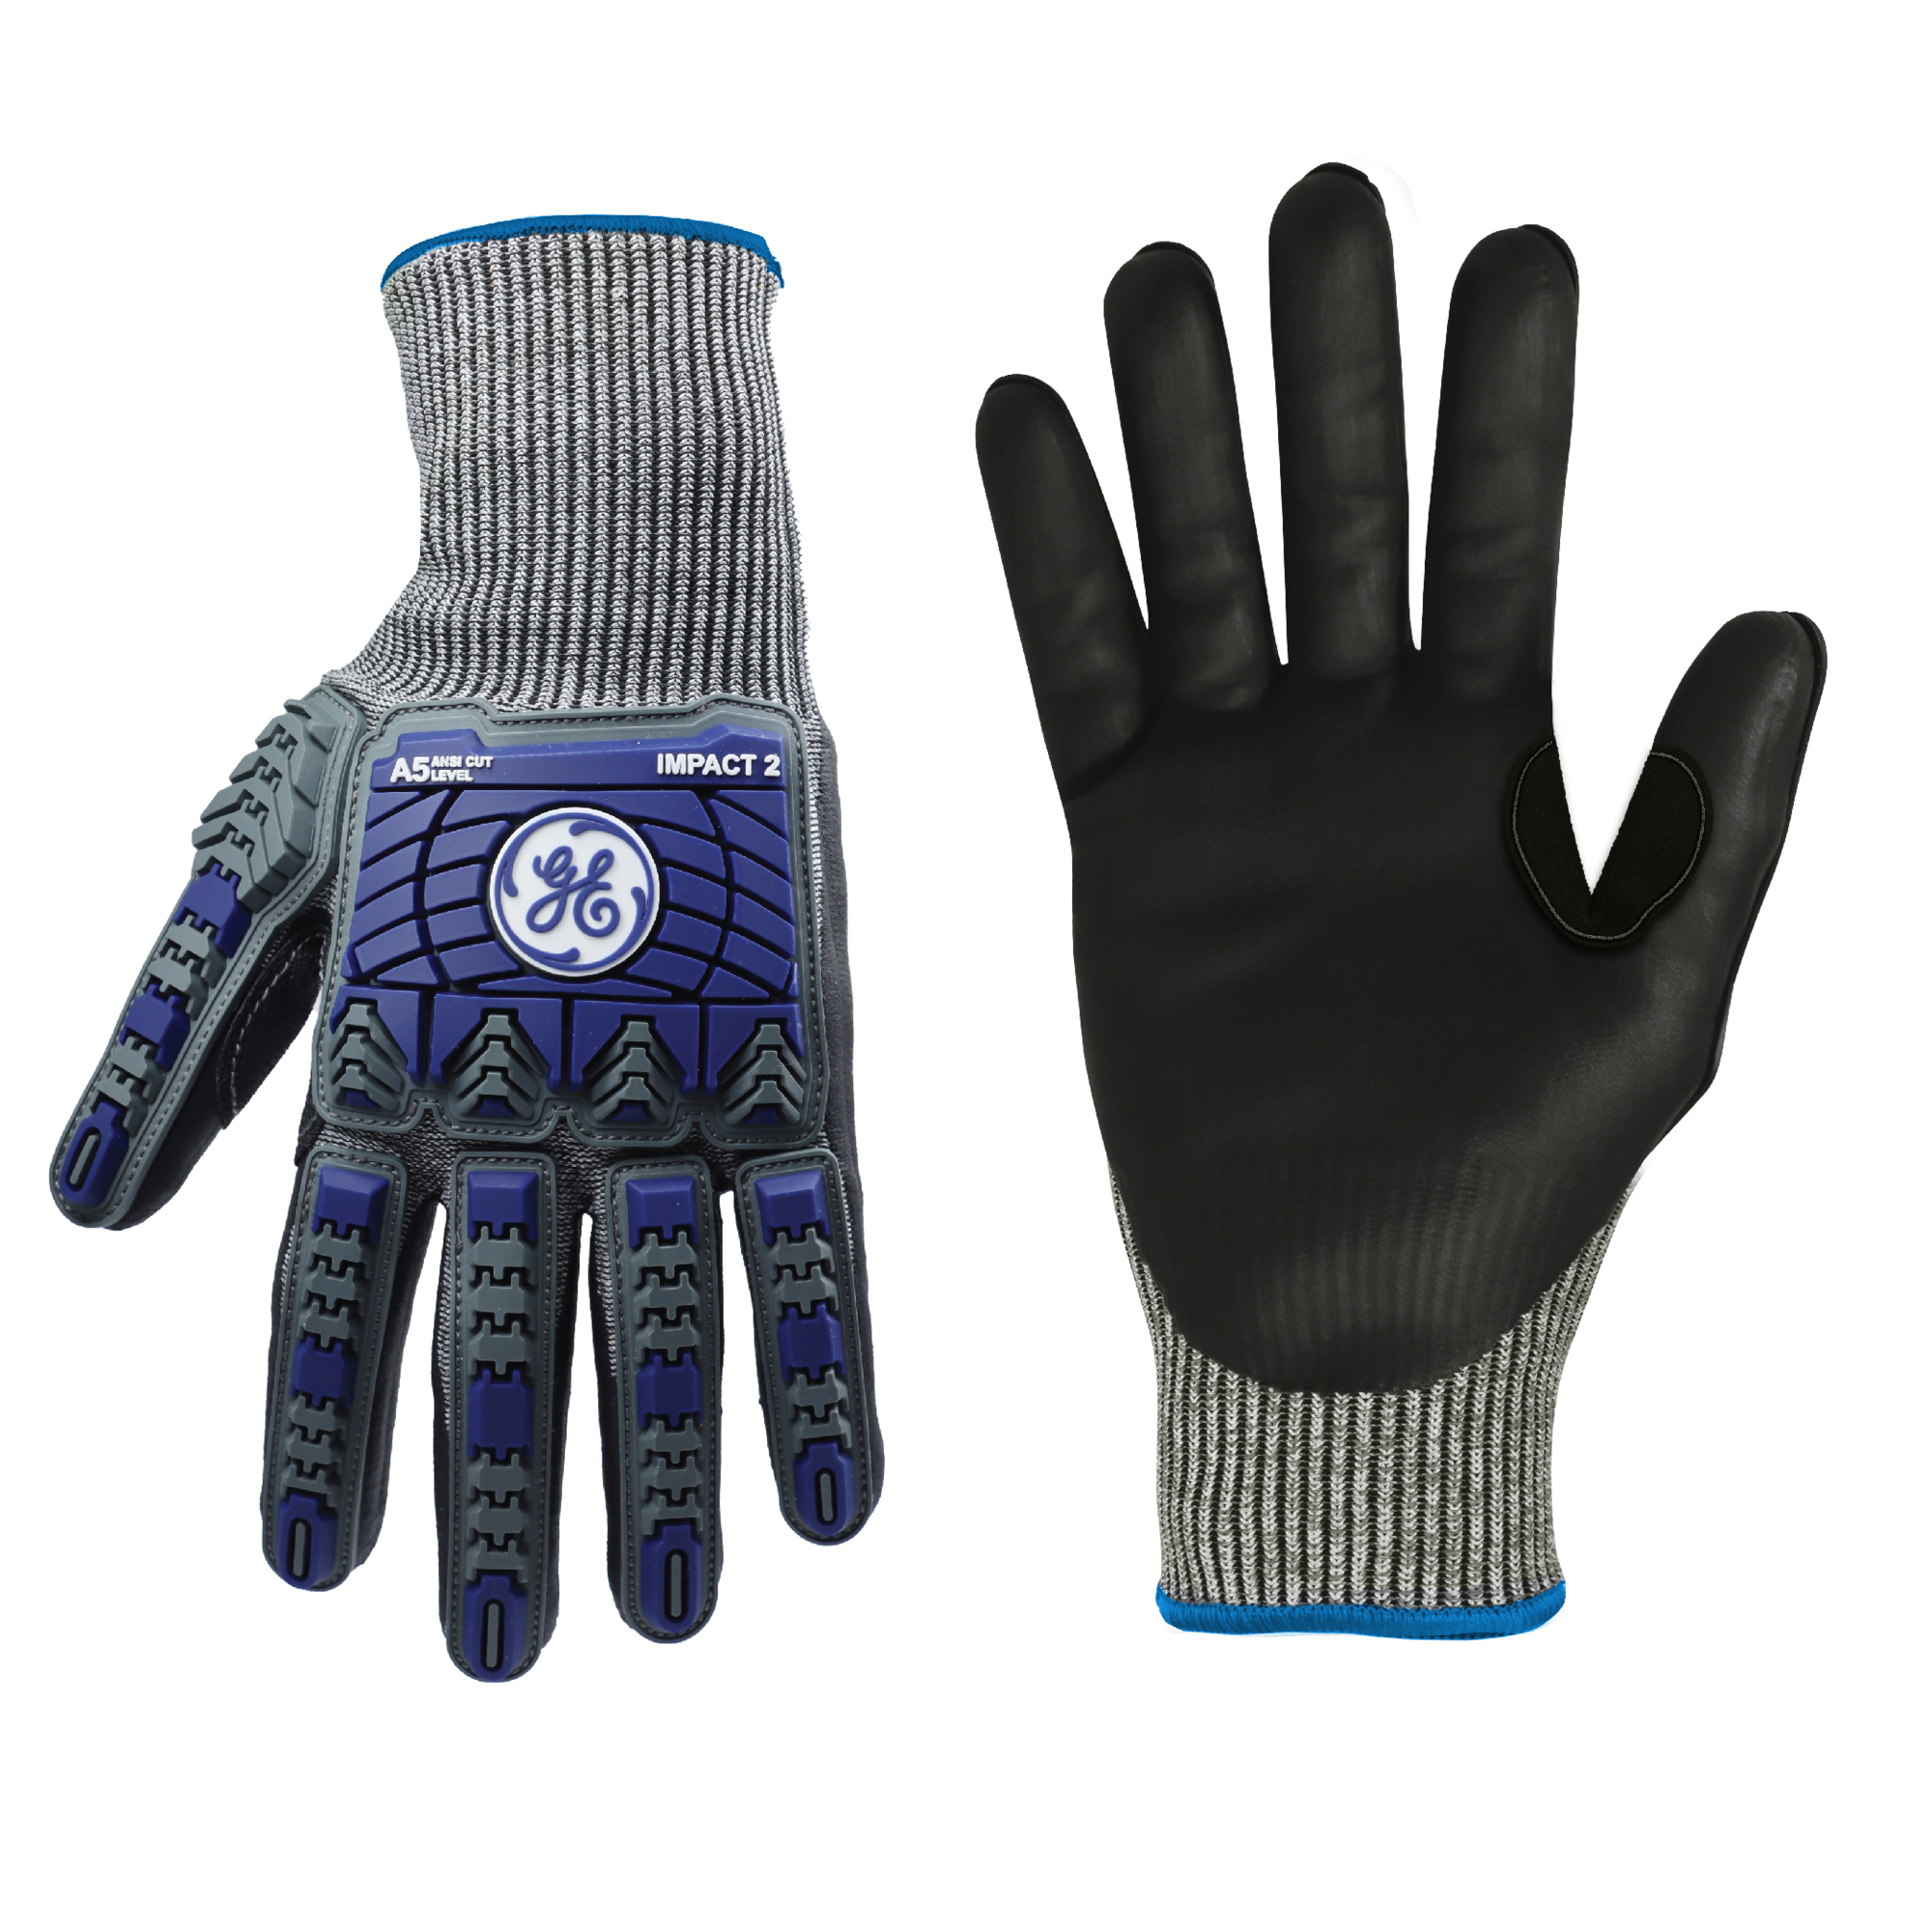 General Electric, Work Gloves Blue/Gray M 1 pk, Size M, Color Blue, Included (qty.) 1 Model GG244MC